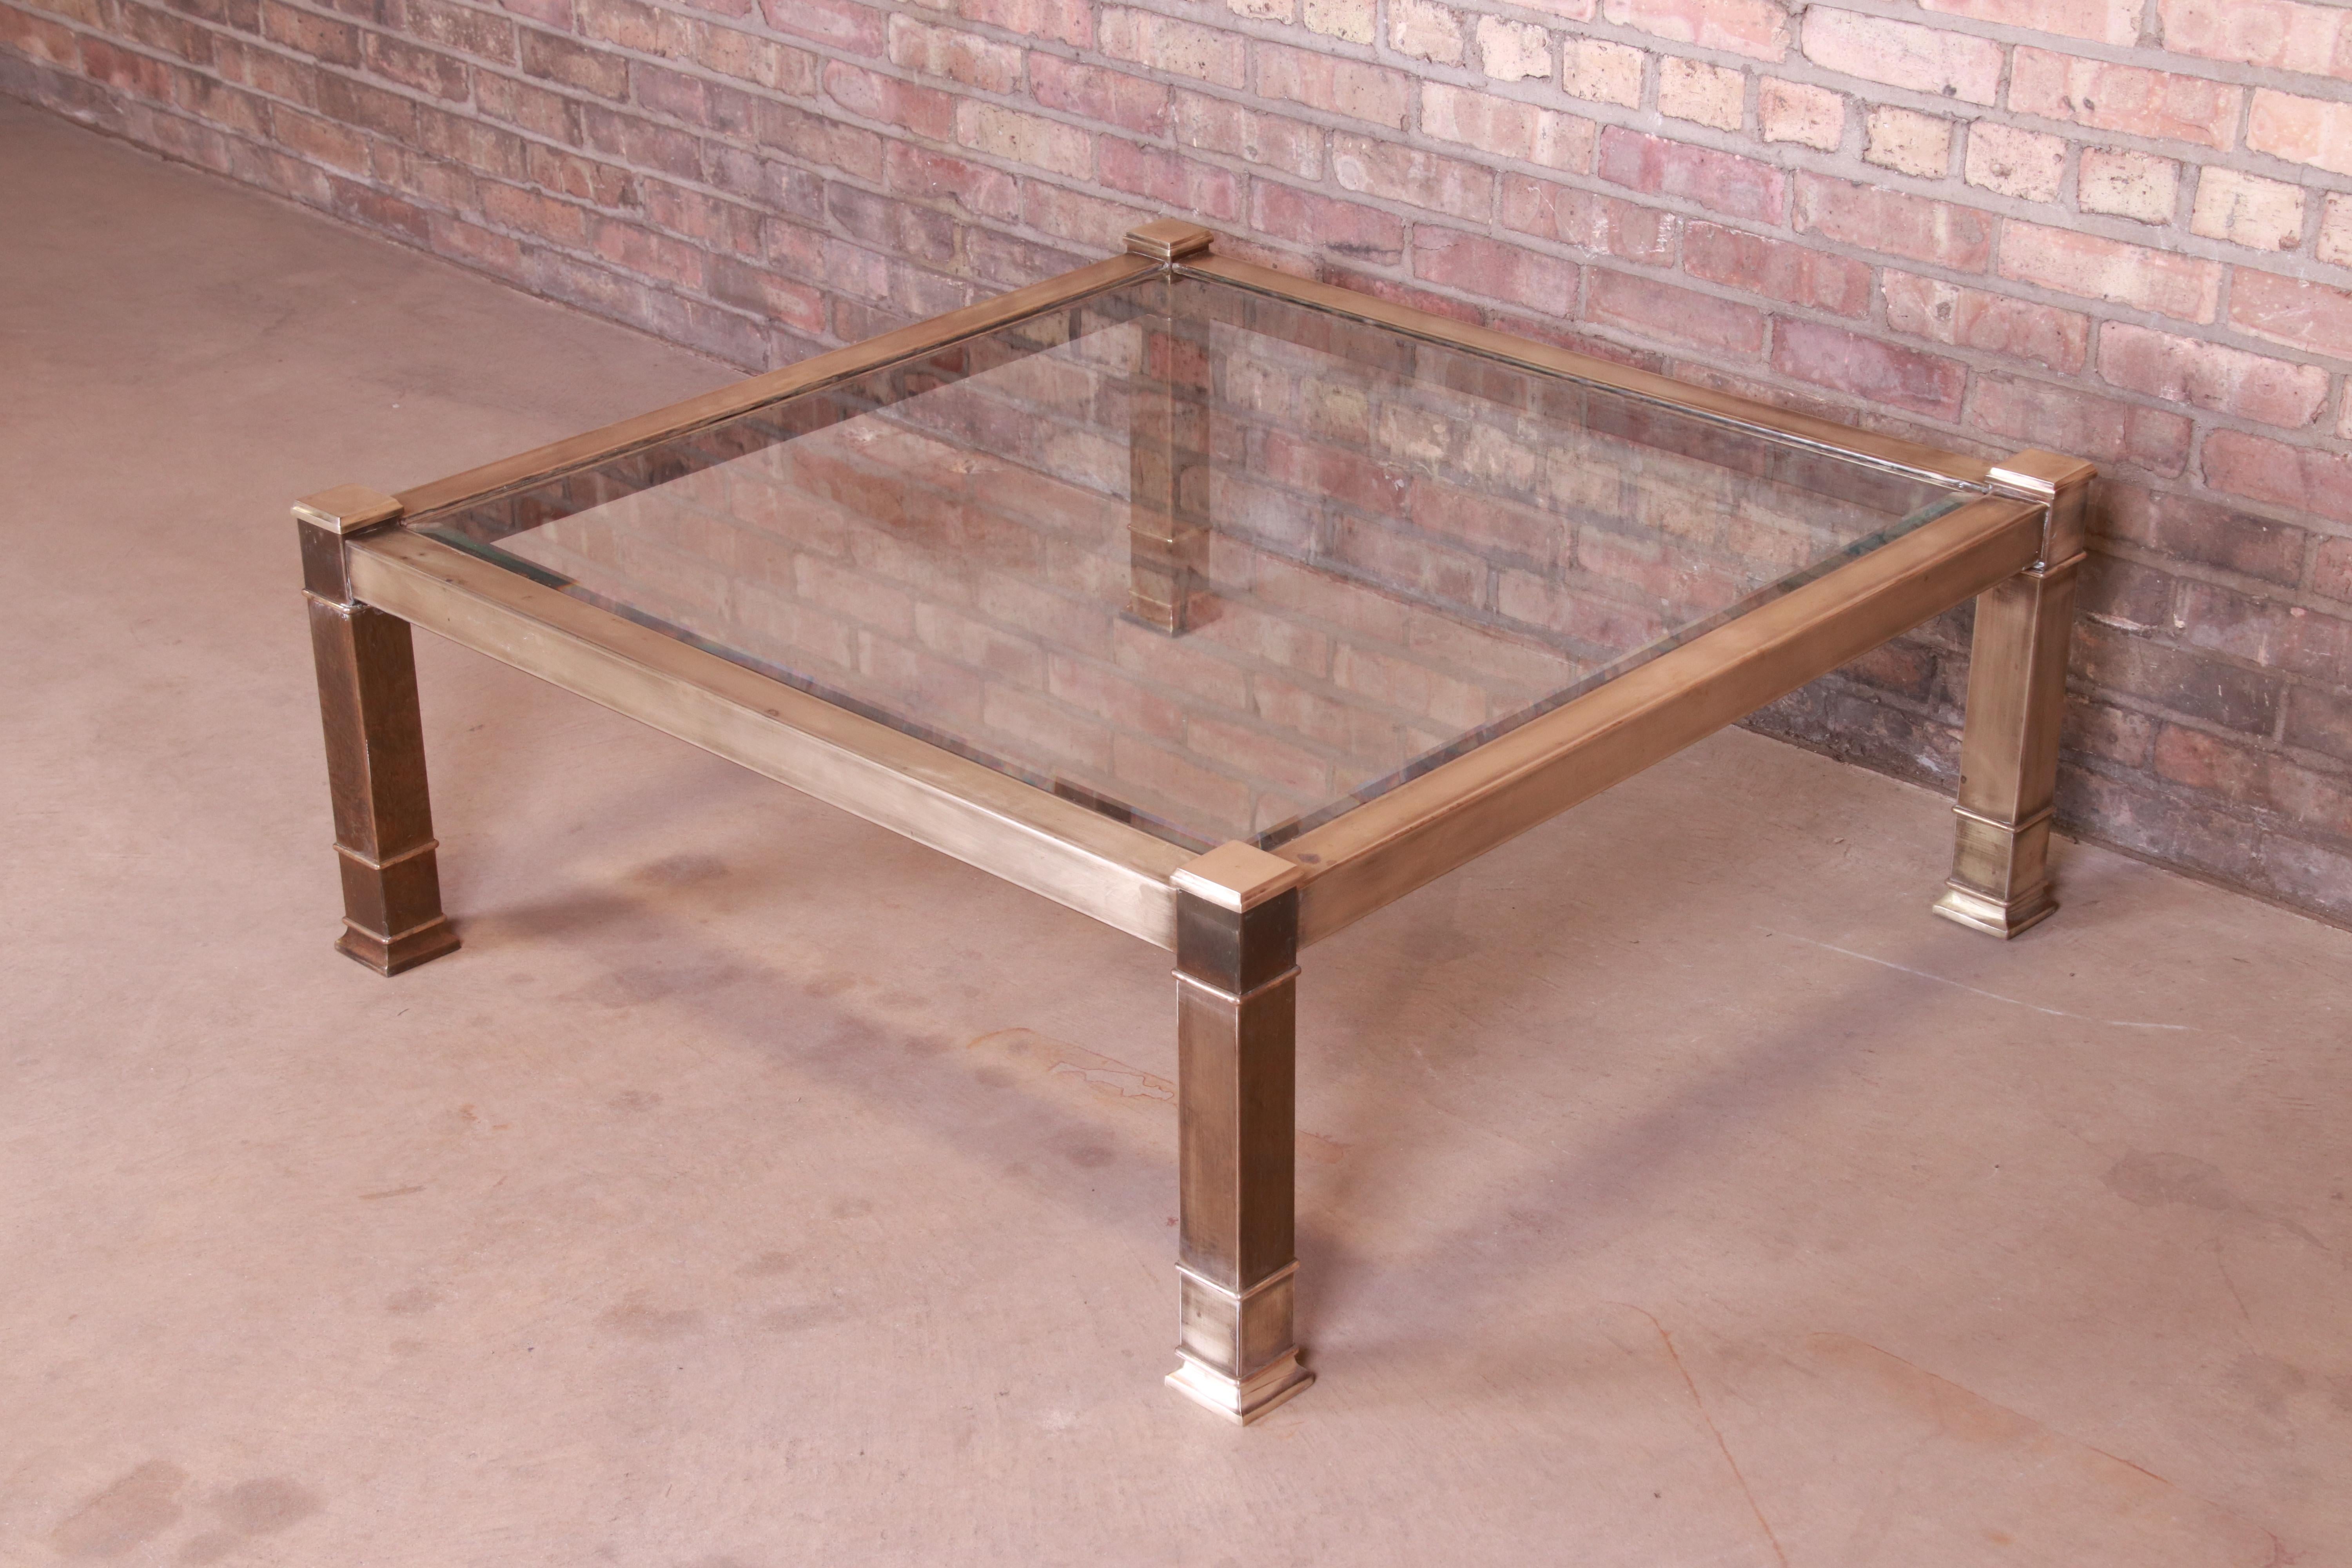 American Mastercraft Midcentury Hollywood Regency Brass and Glass Cocktail Table, 1970s For Sale